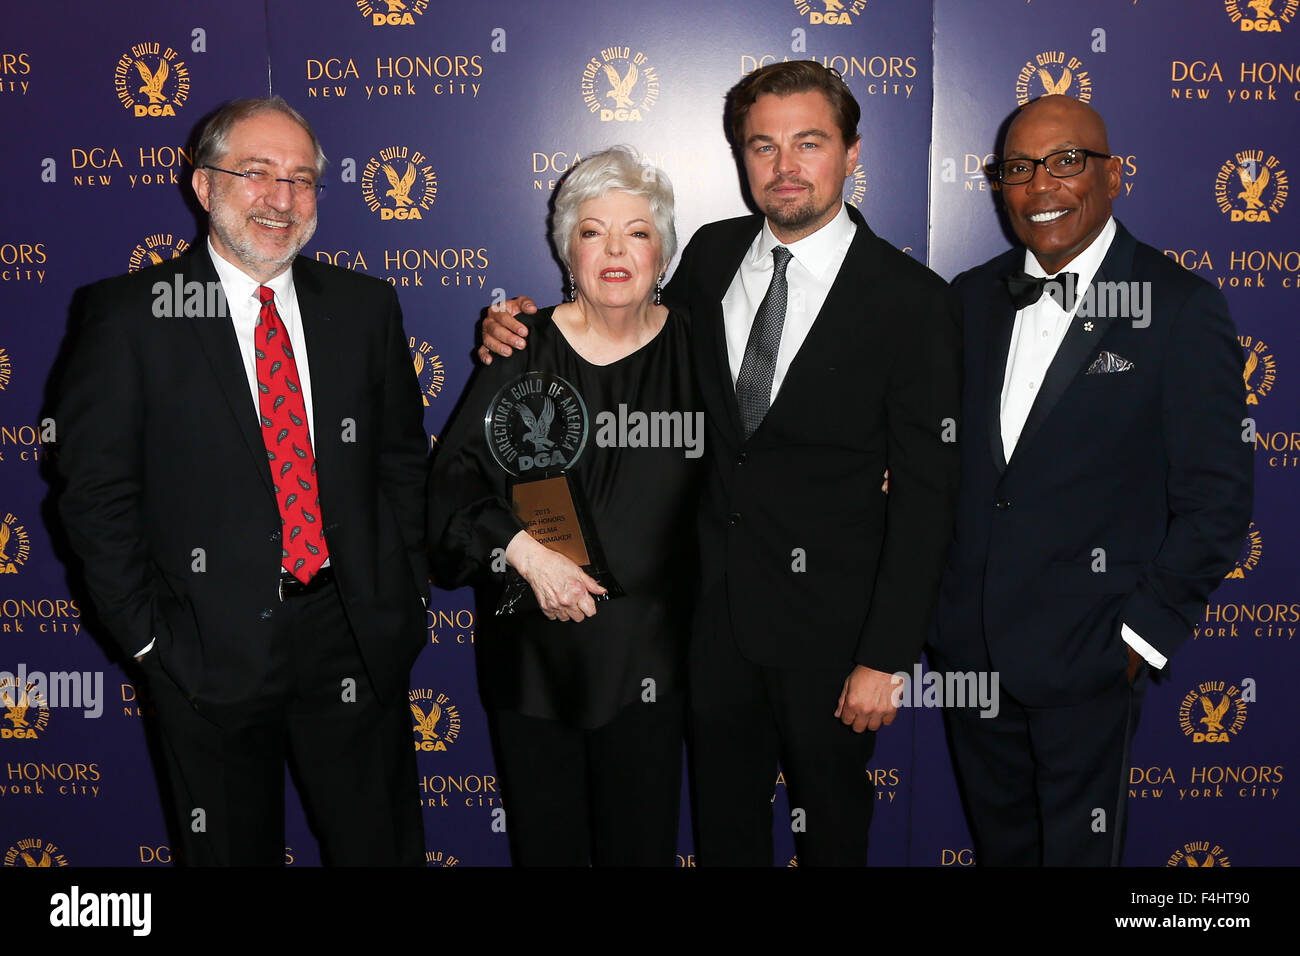 Vincent Misiano, Thelma Schoonmaker, Leonardo DiCaprio and Paris Barclay attend the DGA Honors Gala 2015 at the DGA Theater. Stock Photo